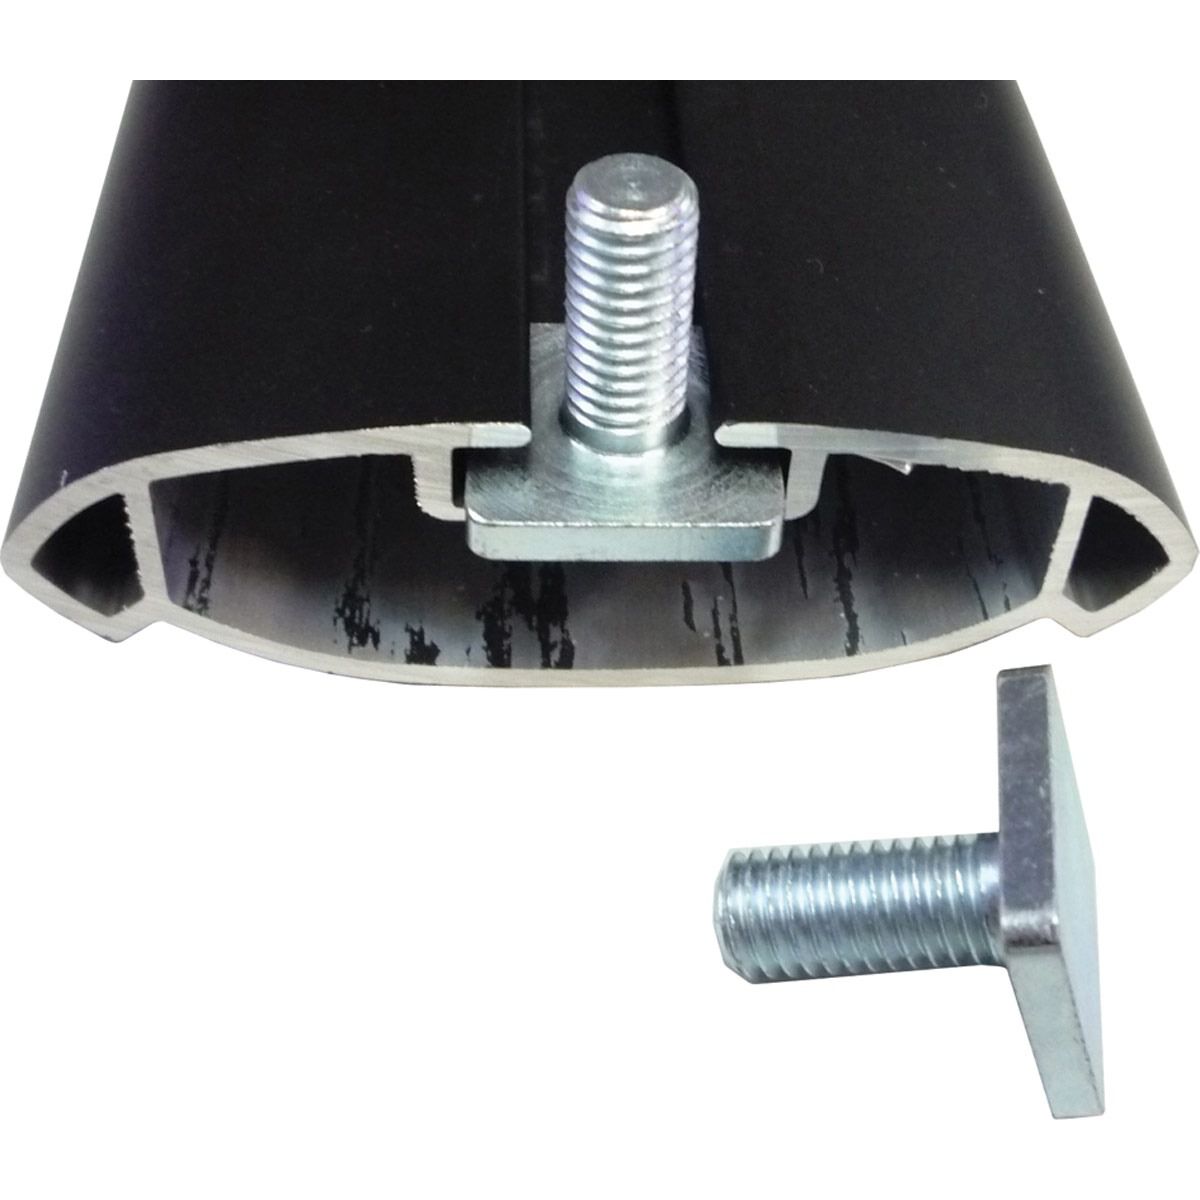 t slot bolts for roof rack